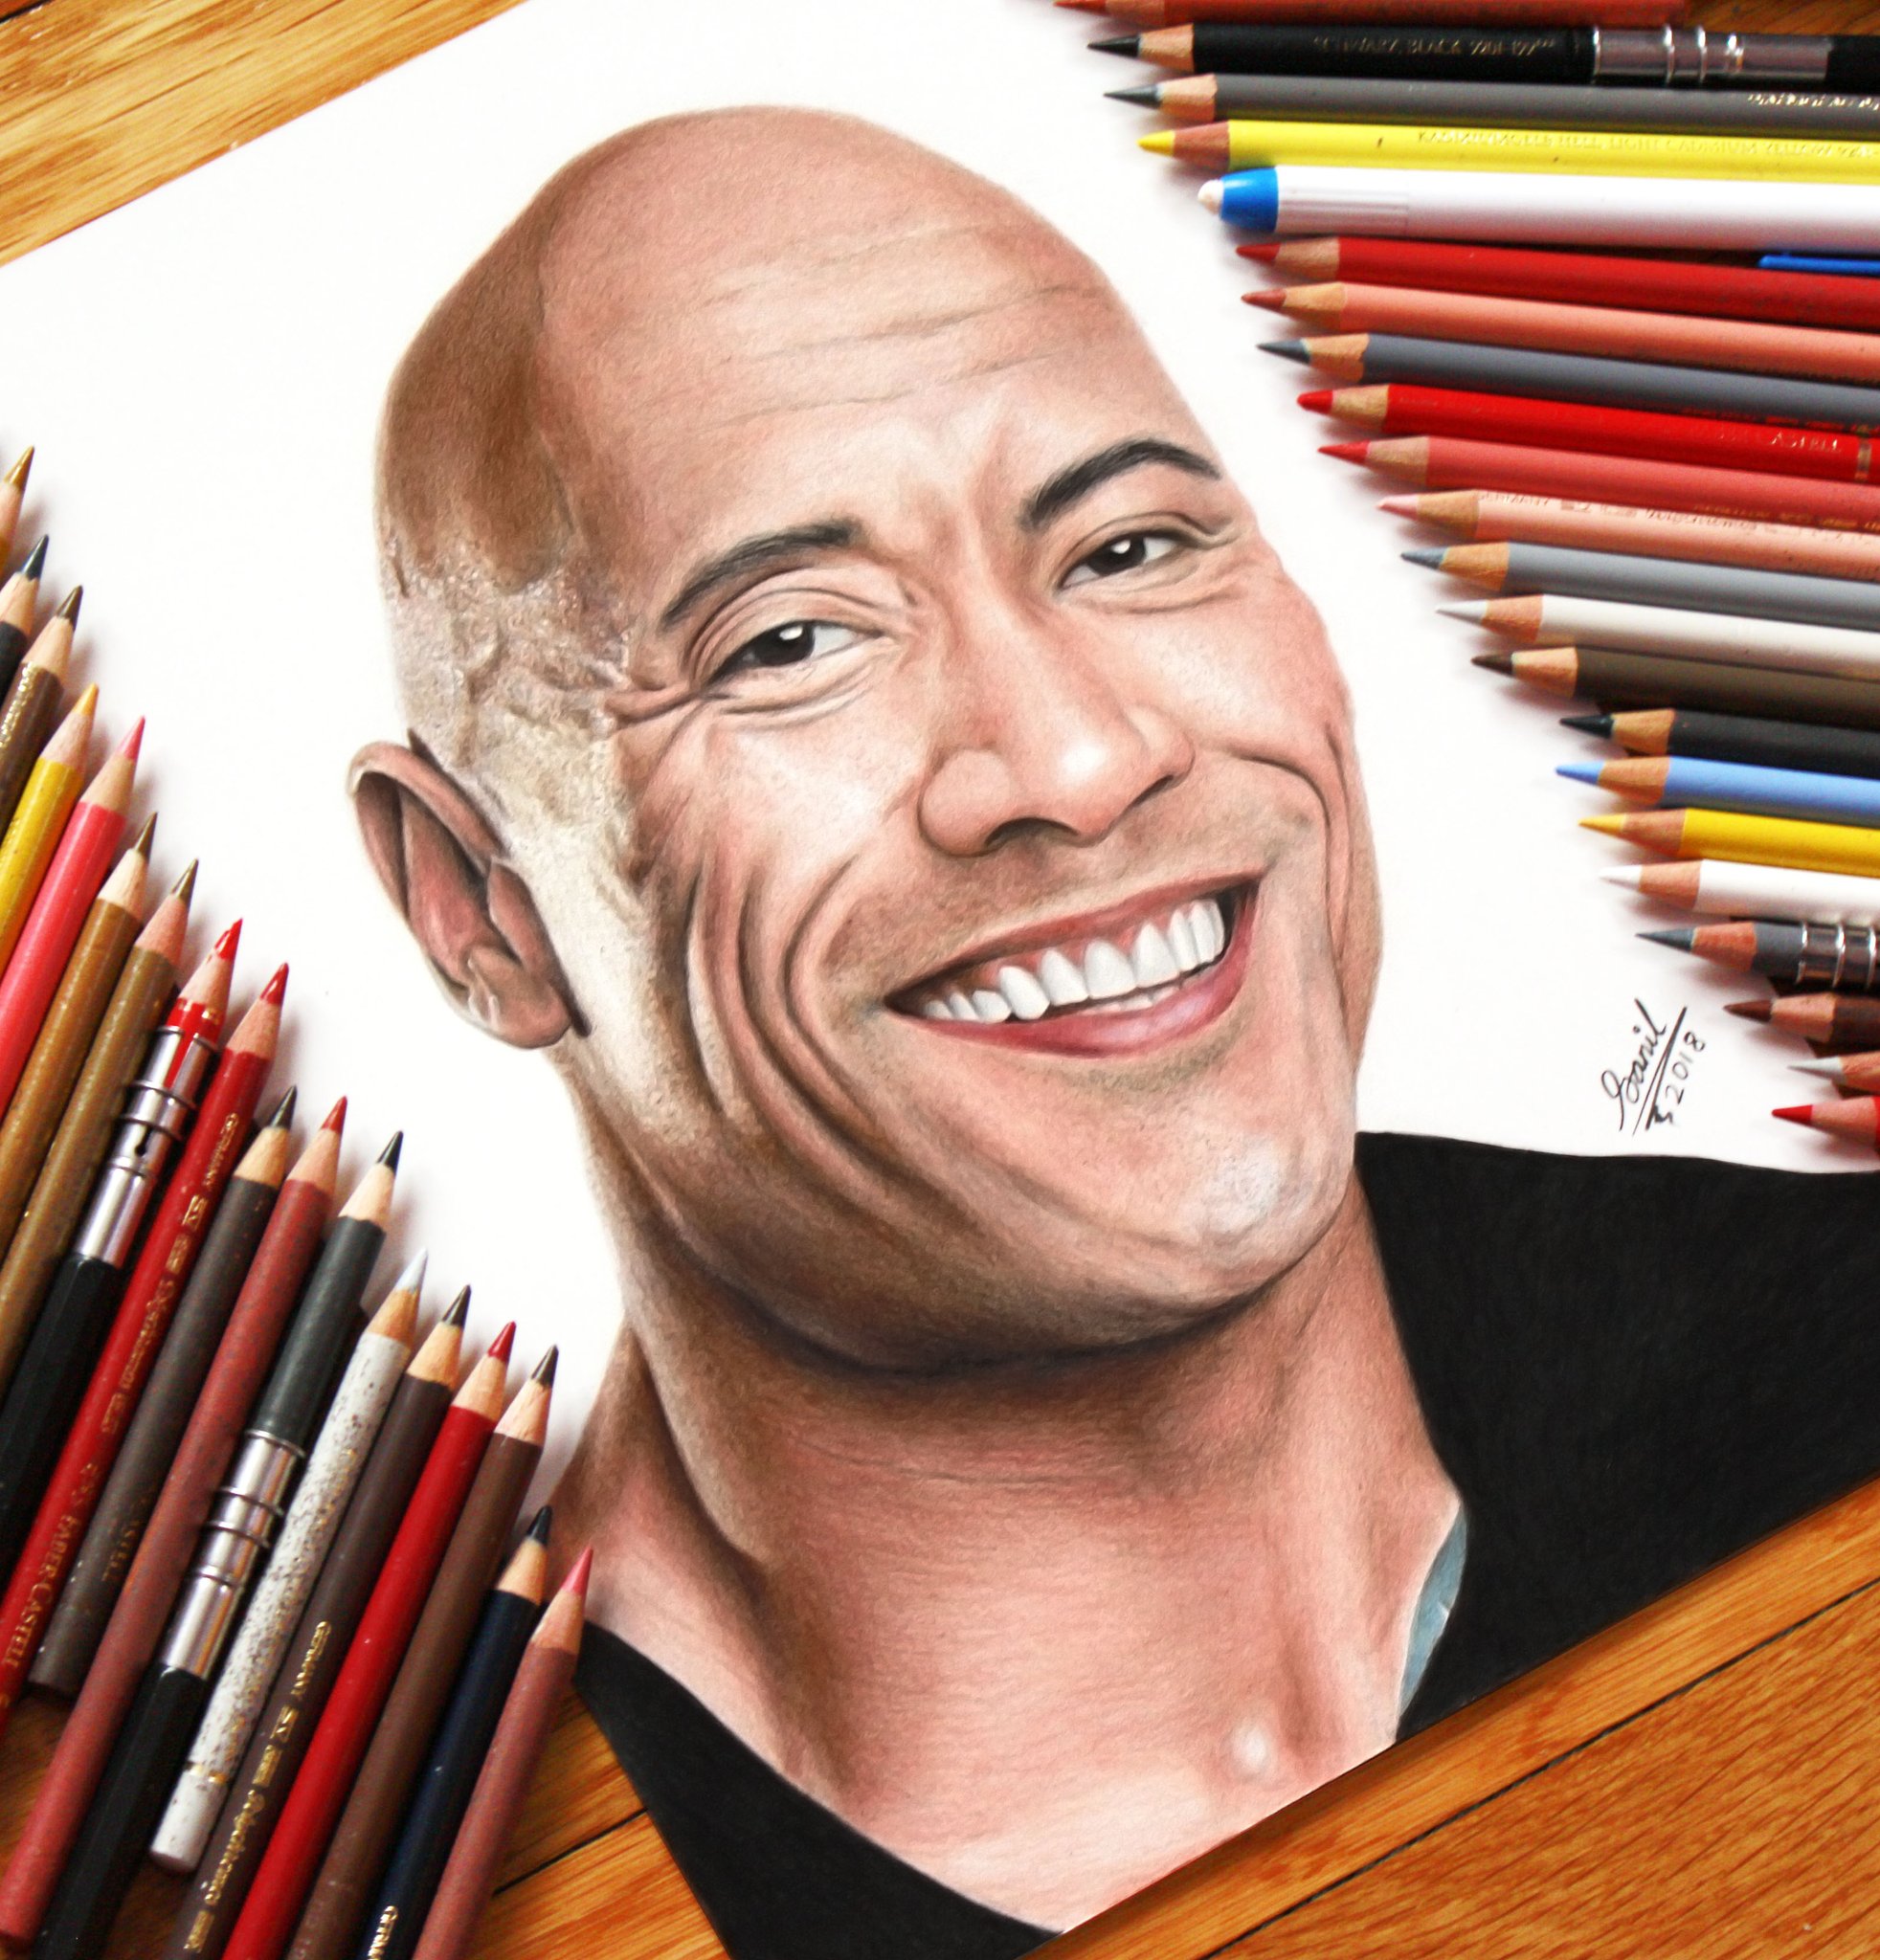 Drawing Dwayne The Rock Johnson  Realistic pencil drawing timelapse   YouTube